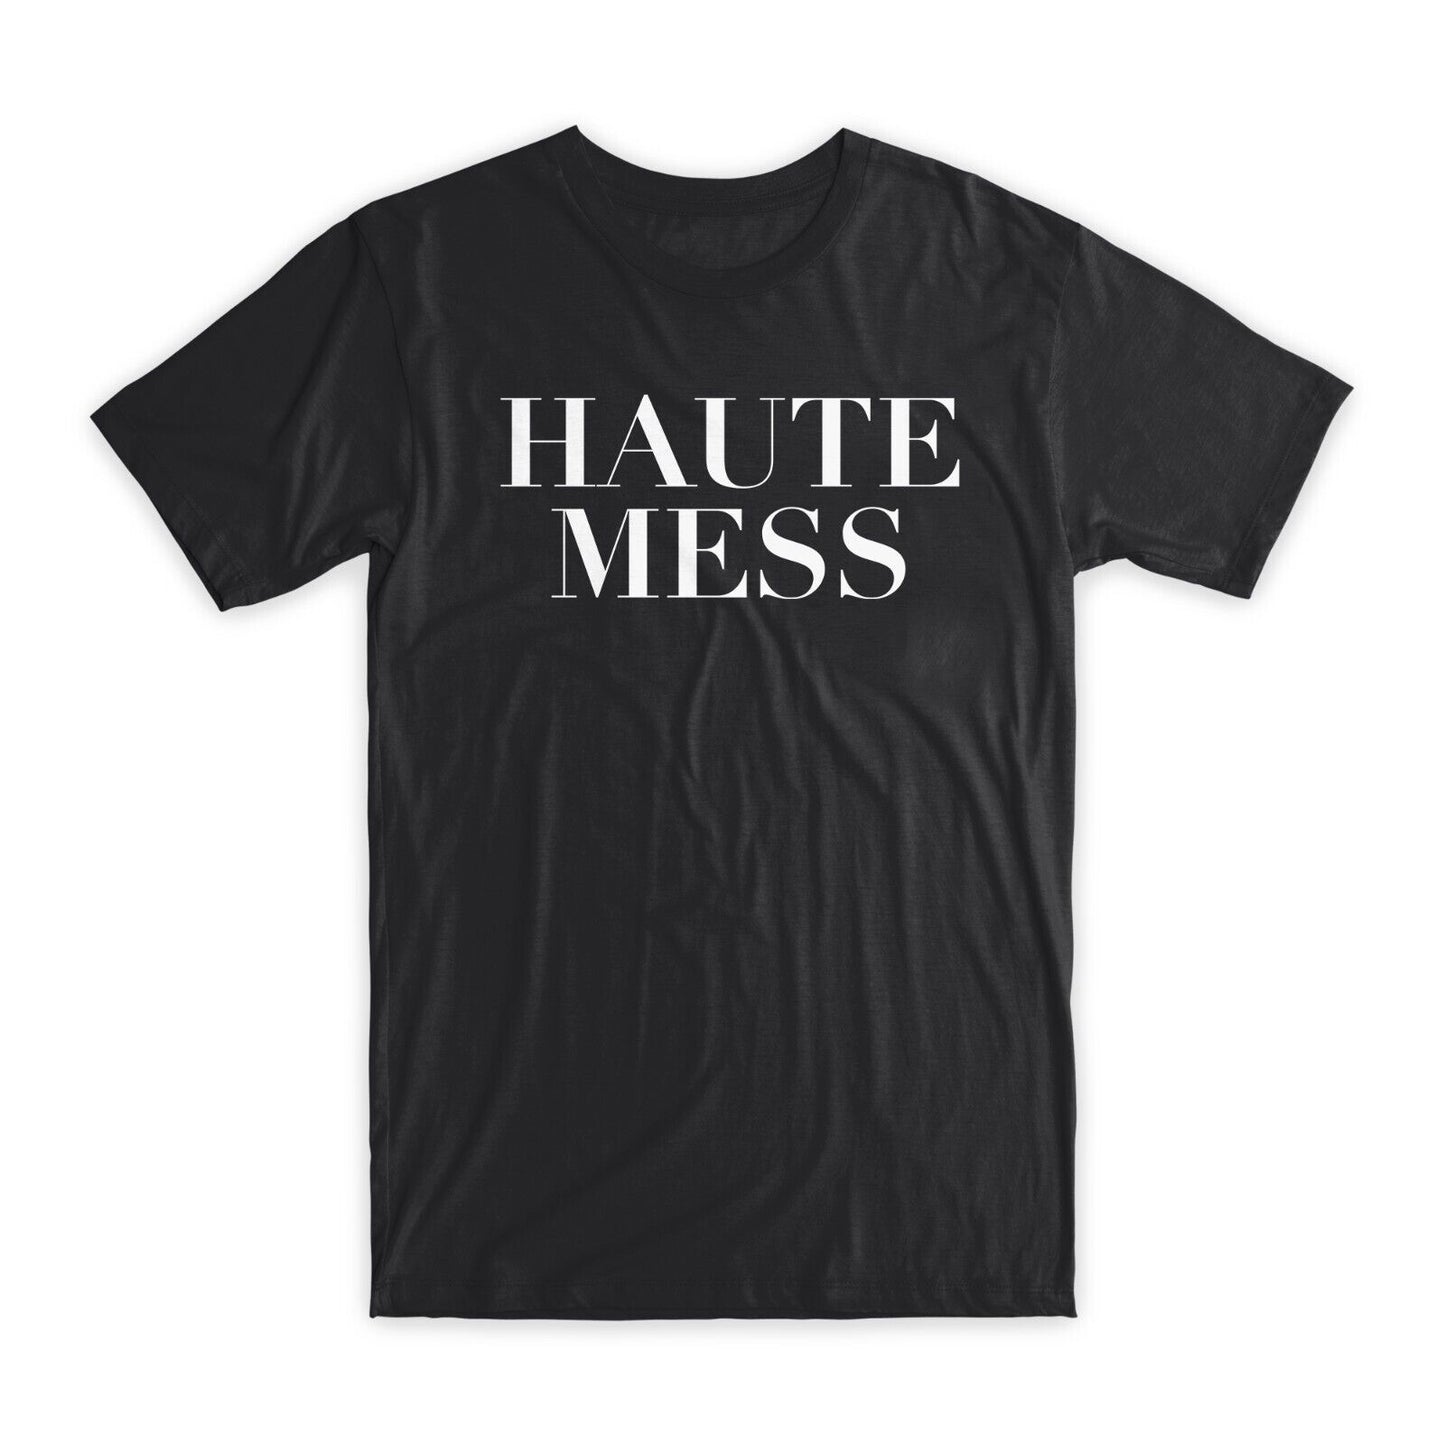 Haute Mess T-Shirt Premium Soft Cotton Crew Neck Funny Tees Novelty Gifts NEW